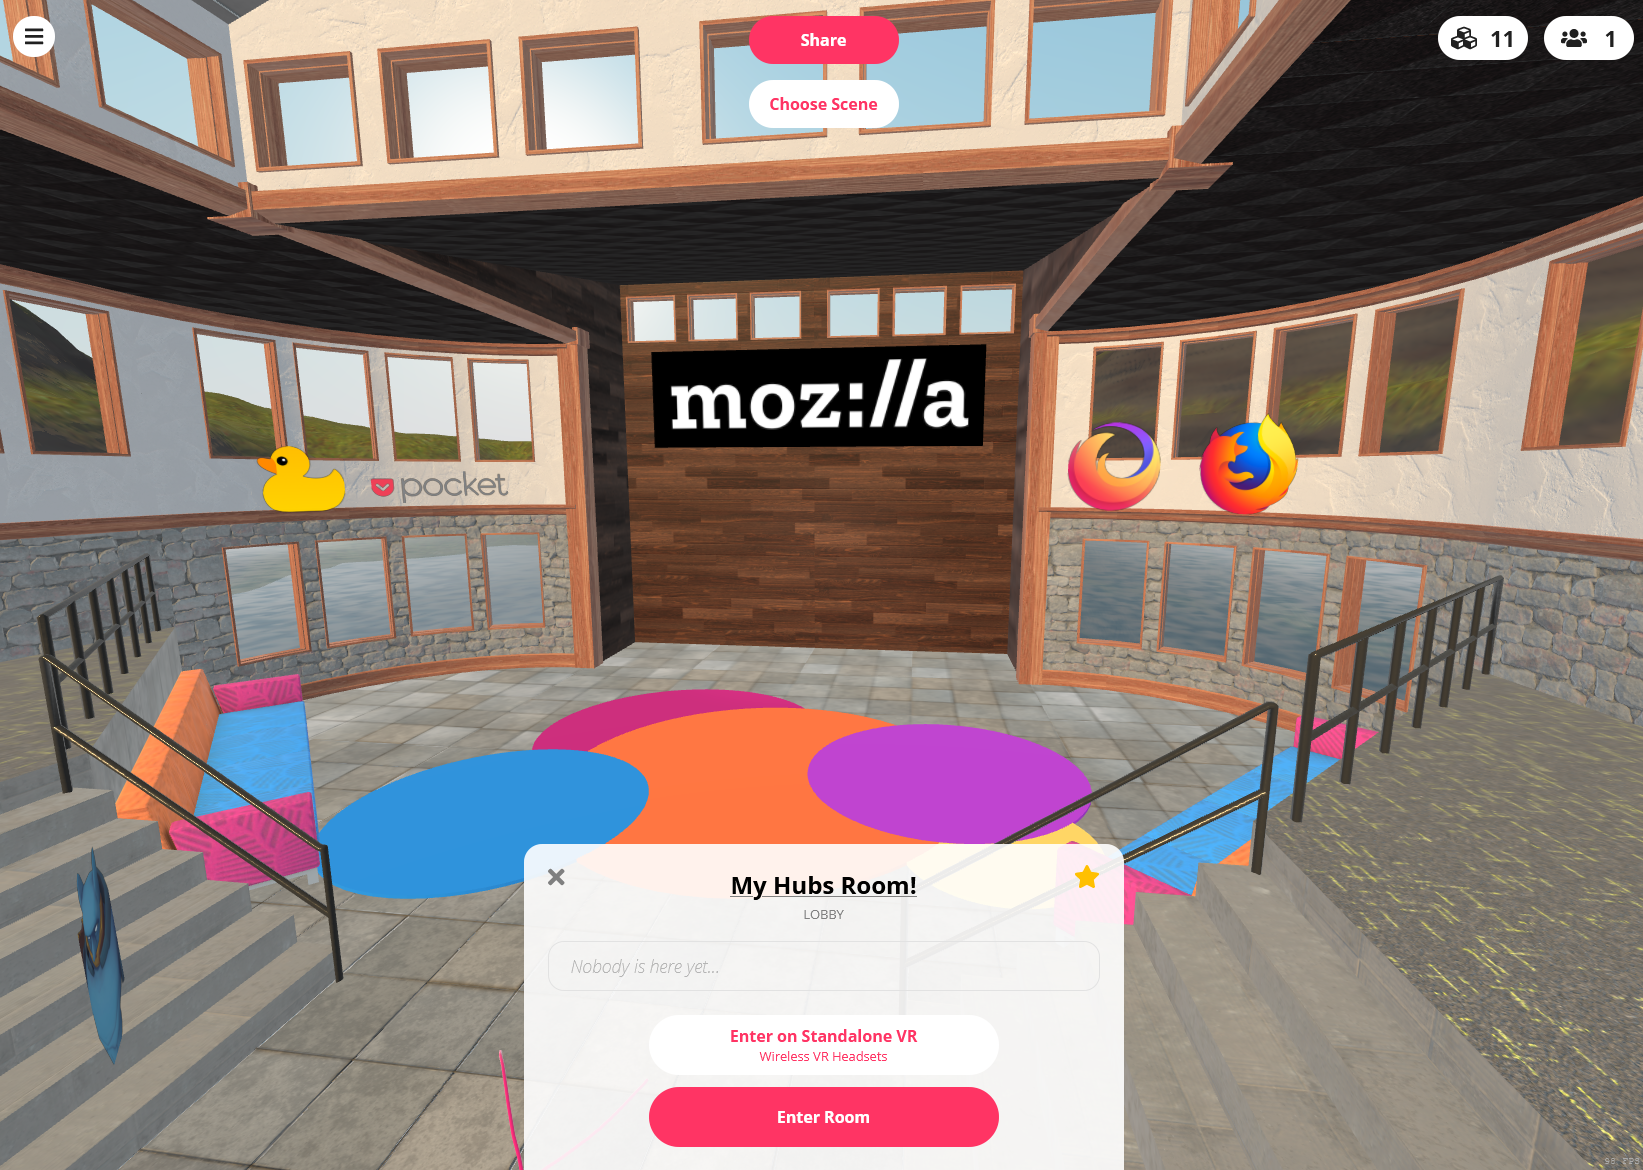 A virtual meeting space with colorful chairs. The user has not yet entered, so the website is showing the "Lobby" UI.